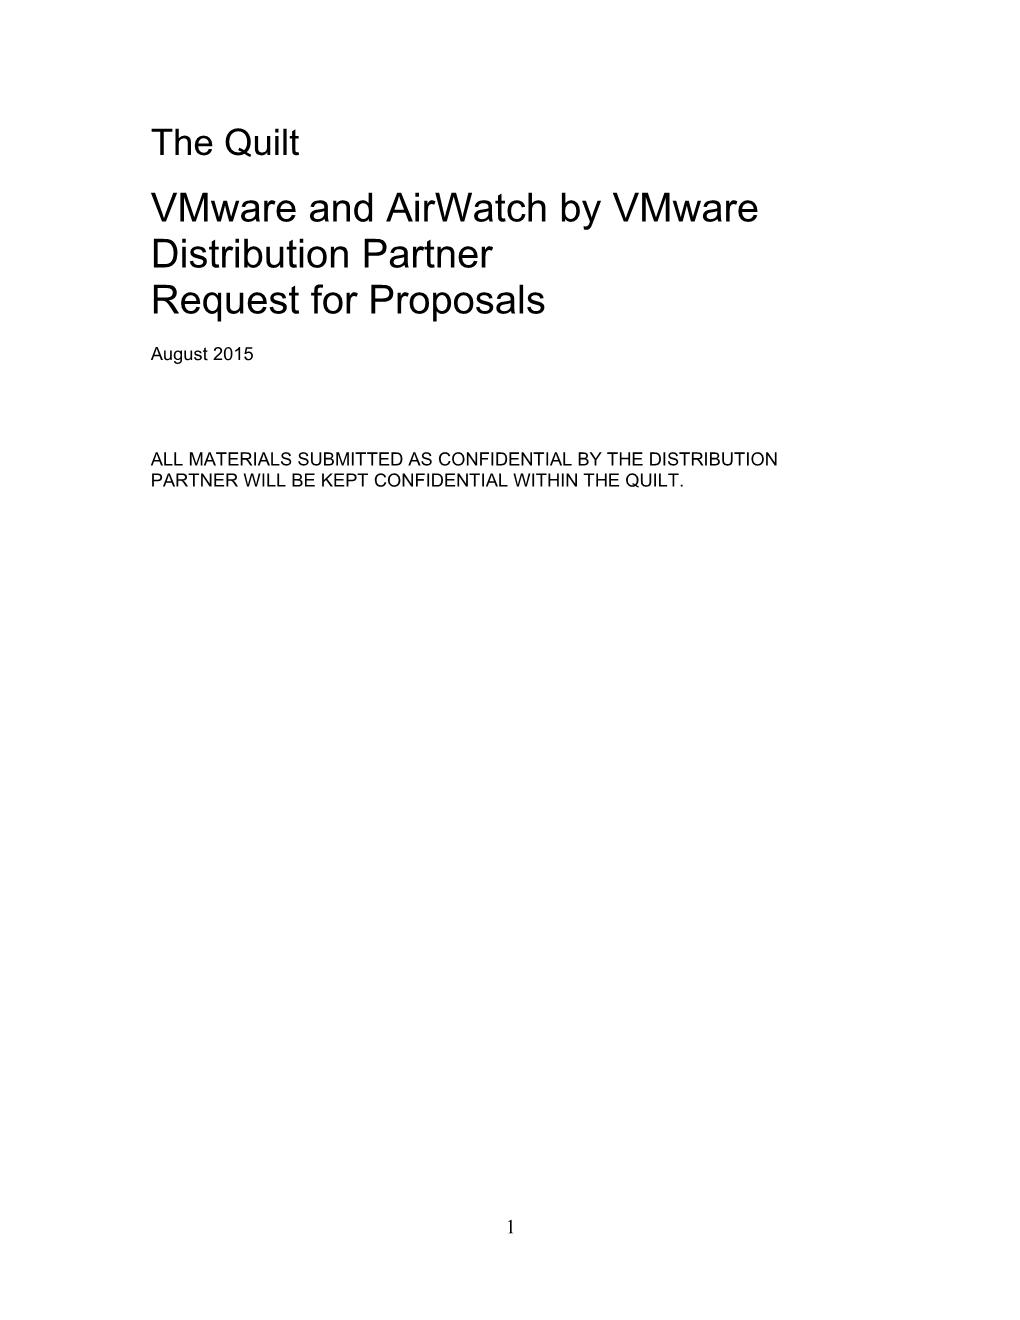 Vmware and Airwatch by Vmware